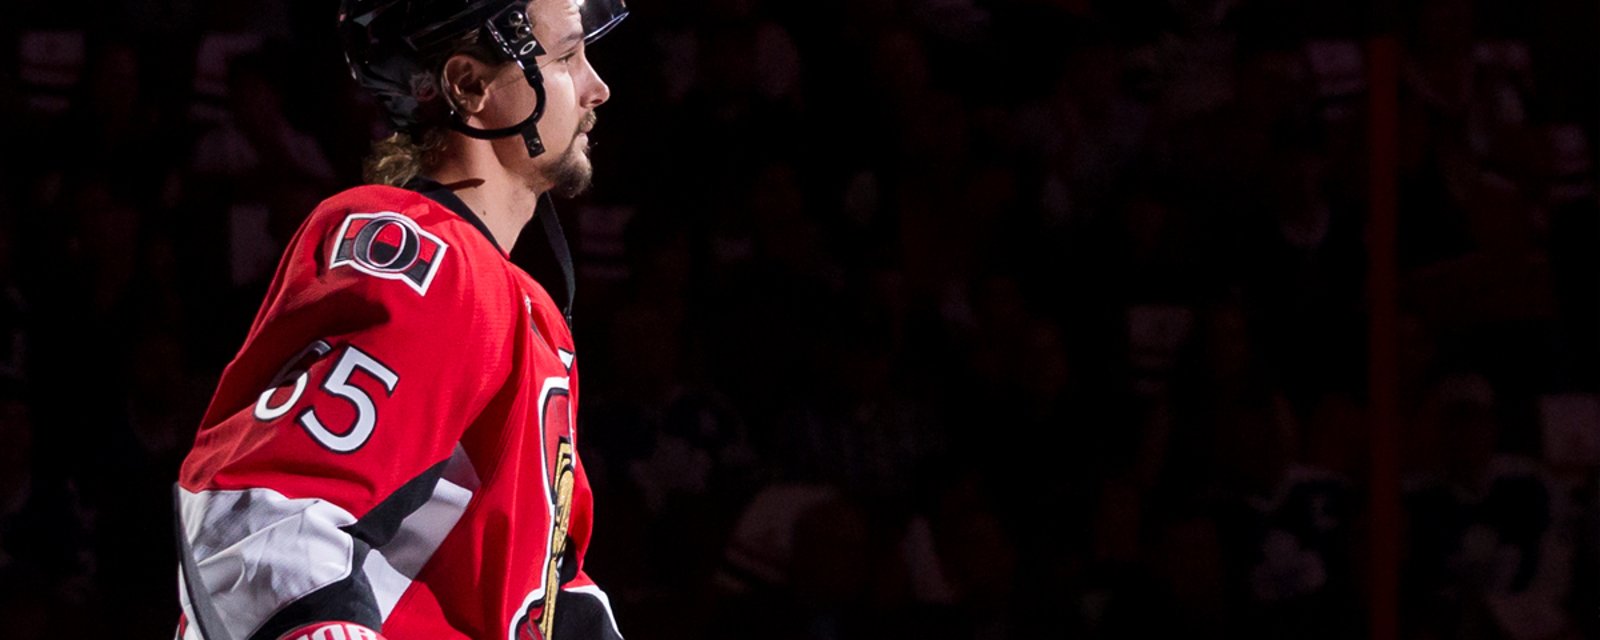 Breaking: Karlsson may be out for longer than expected